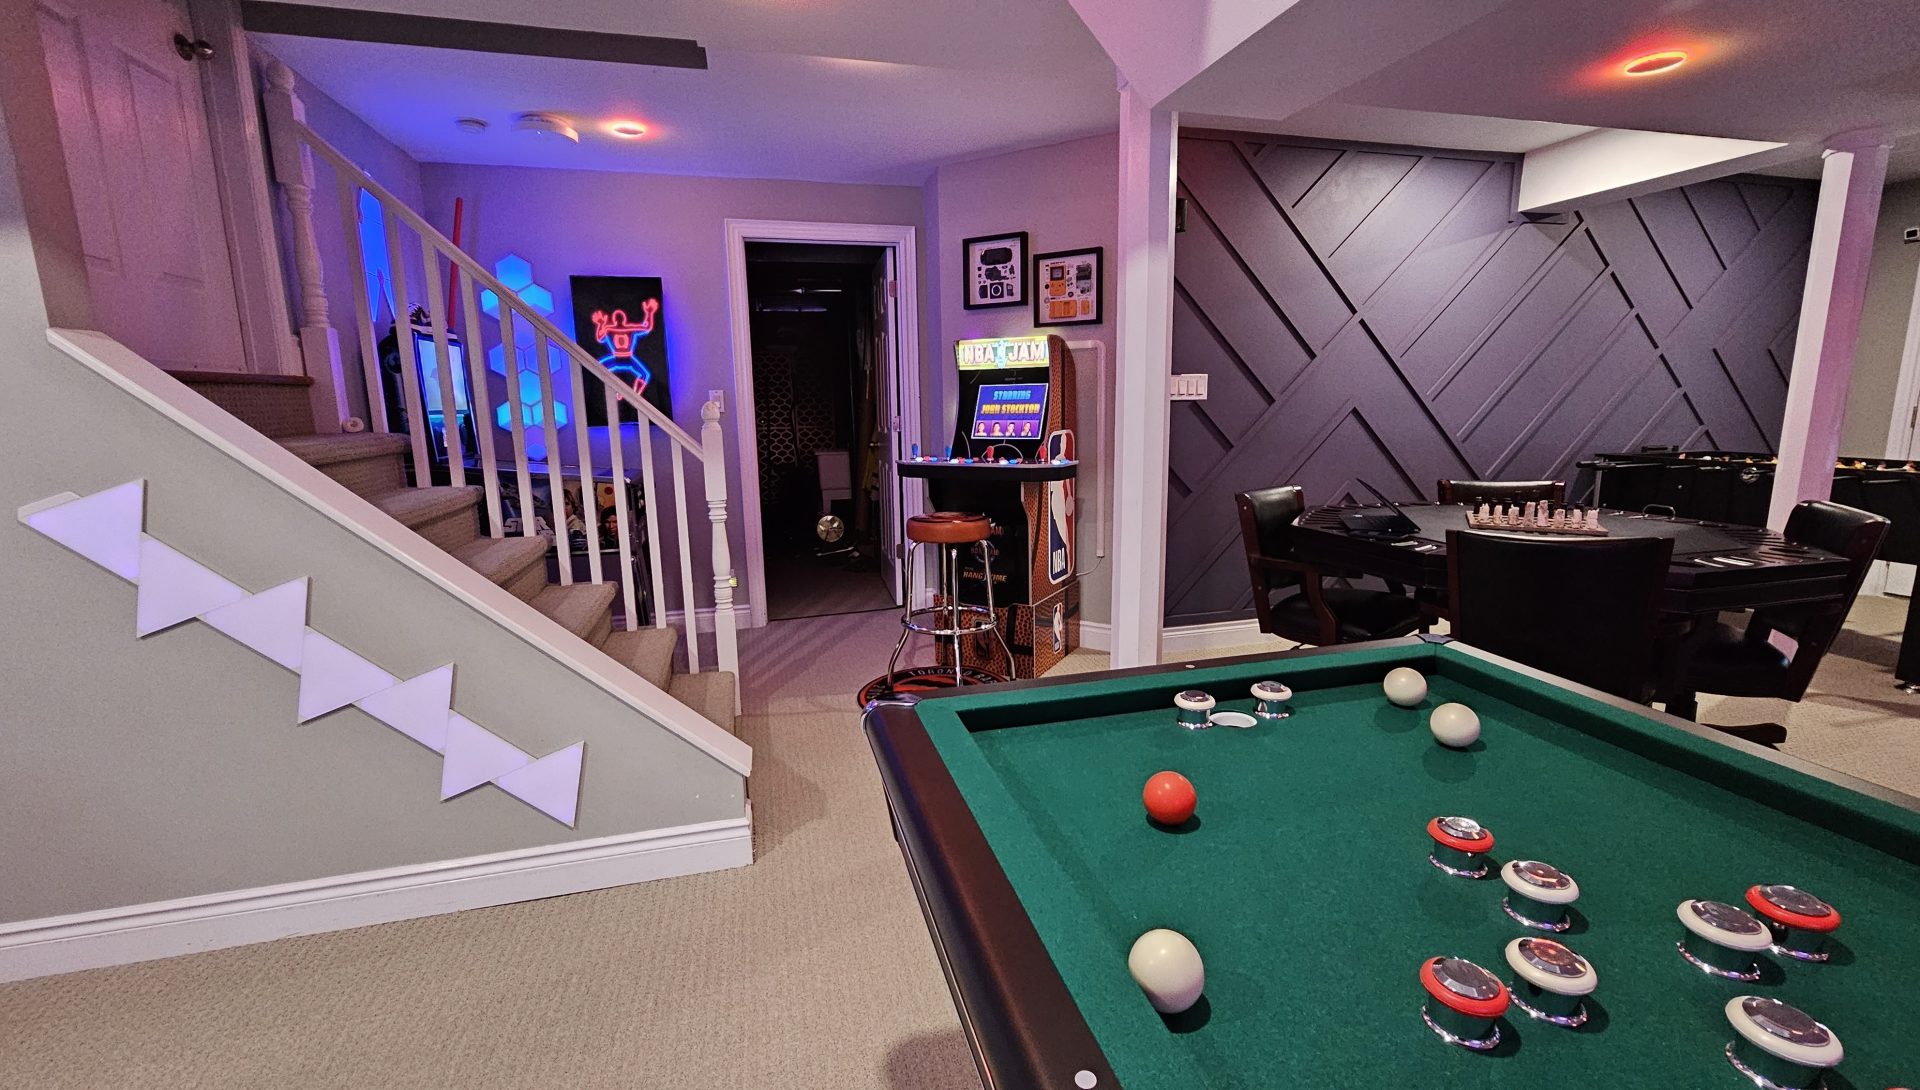 Jam Press JMP419668 £59,000 Basement Makeover: The Ultimate Man Cave with Poker, Fog Machine, and Theatre